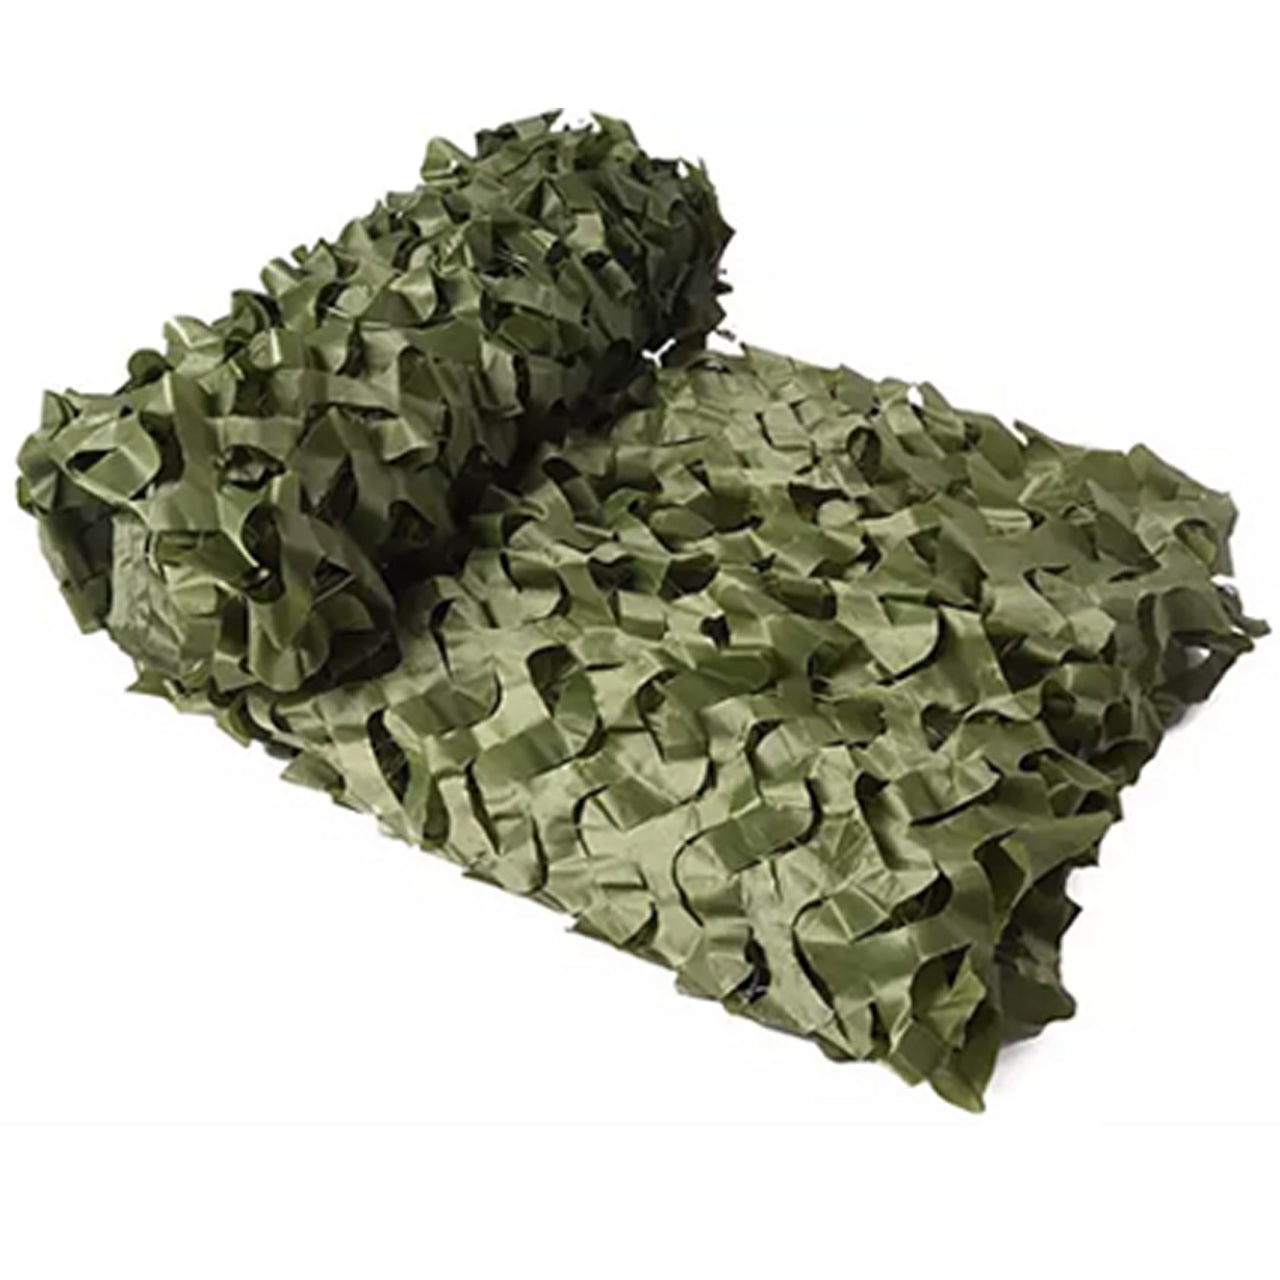 This camouflage net is adopting reliable quality material which is rot resistant and durable to use. It can be well blended with surroundings for invisibility due to it's design and colour. Lightweight and quick drying, it works great for hunting, shooting, hiding vehicles and equipment, building shelters. www.defenceqstore.com.au